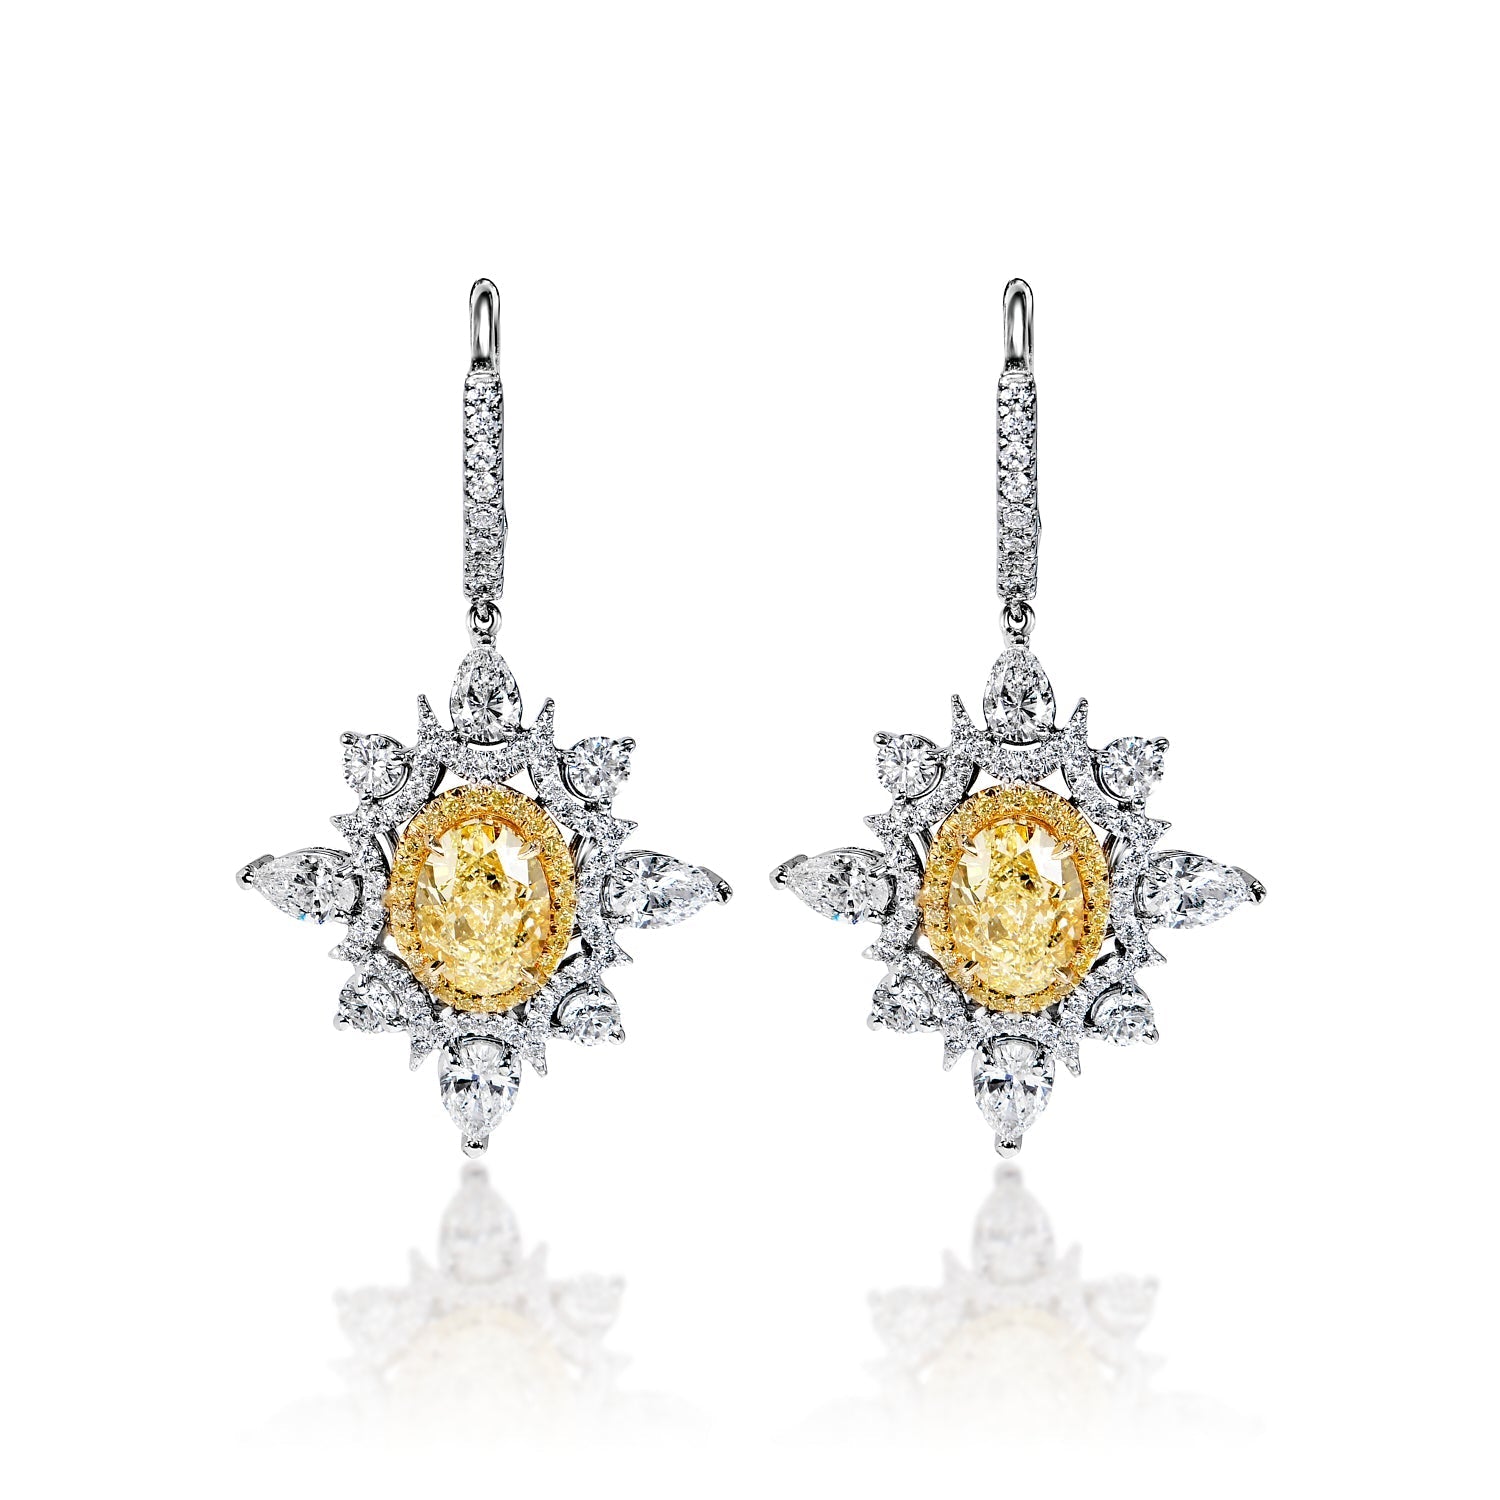 Everleigh 8 Carat FLY IF - VS2 Oval Shape Diamond Leverback Earrings in 18k Yellow & White Gold Front View